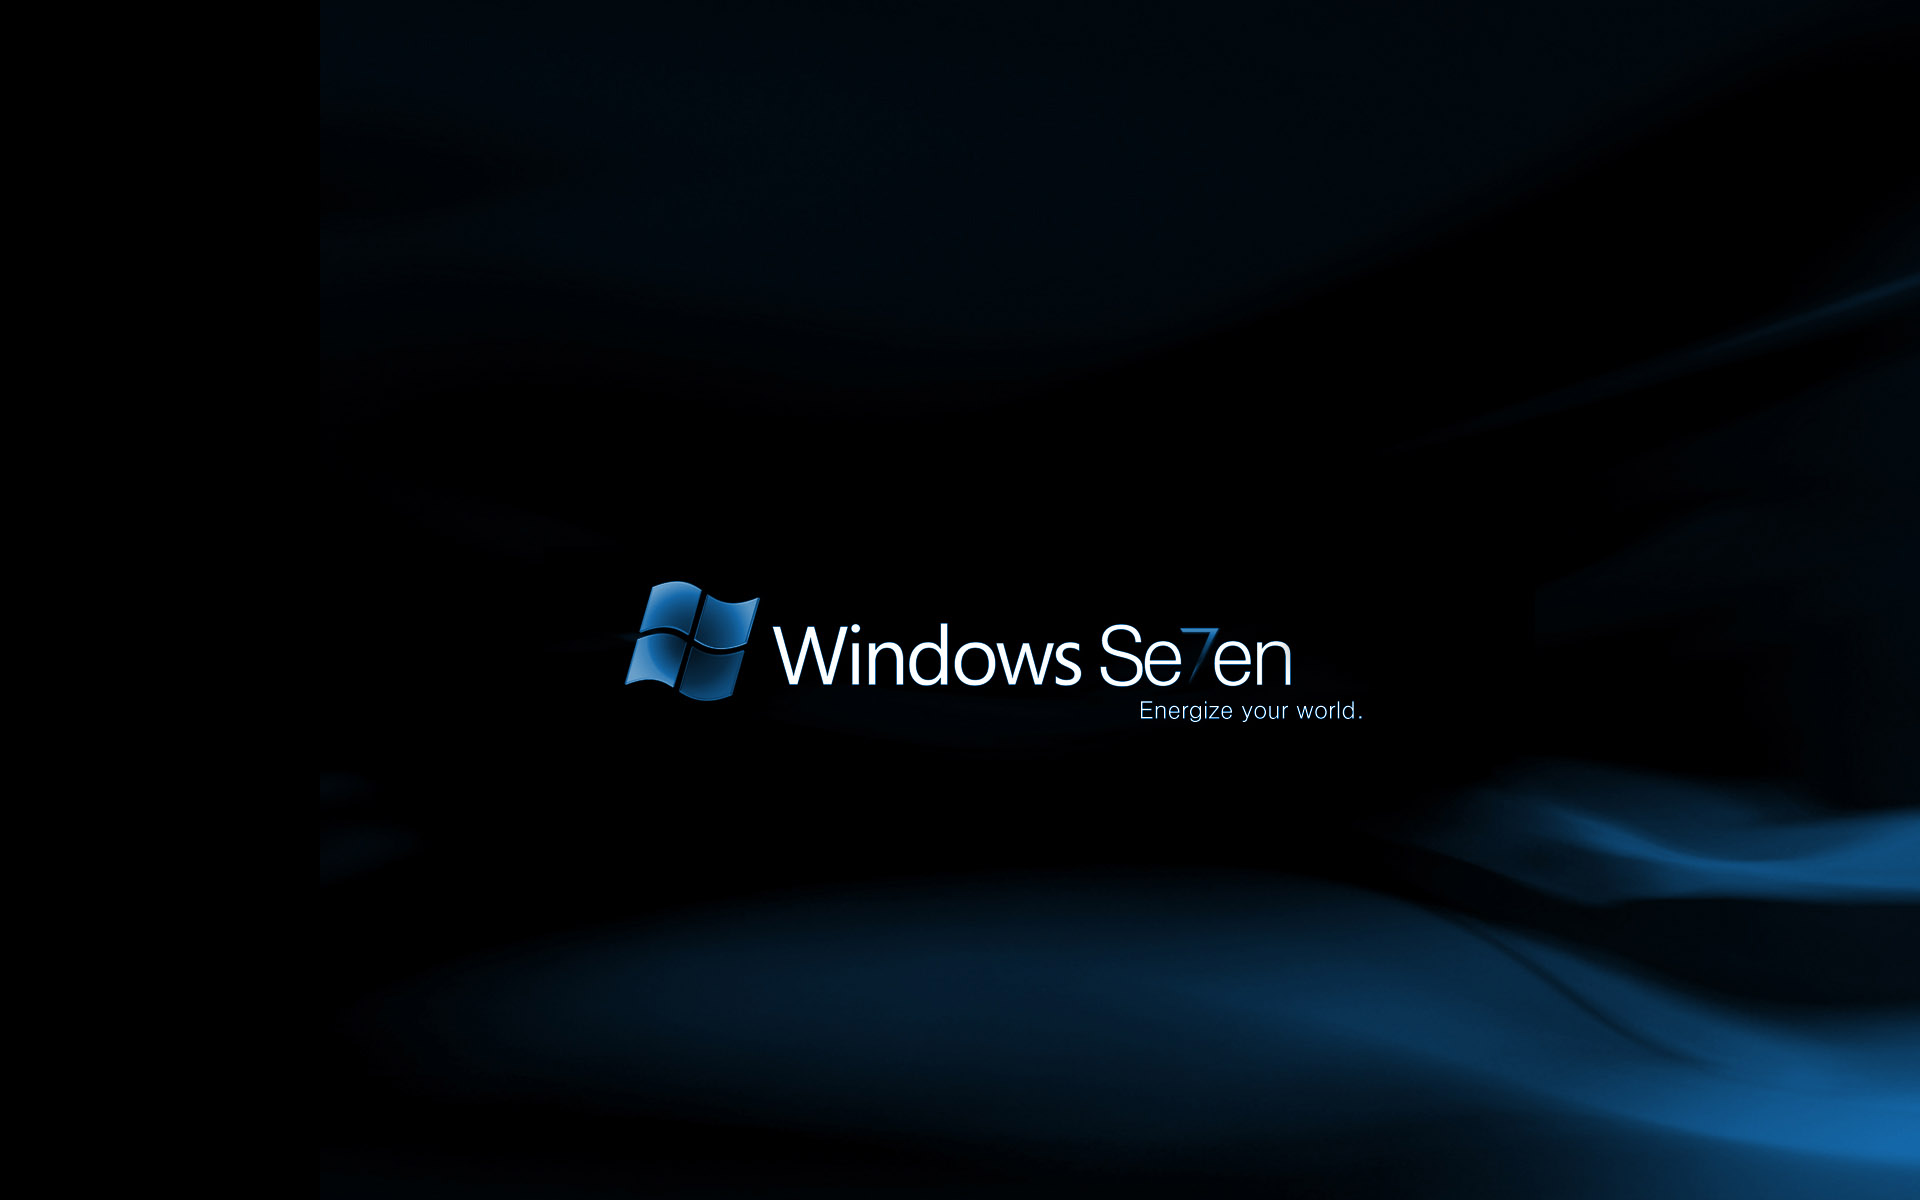 Windows, awesome, computer, wallpaper